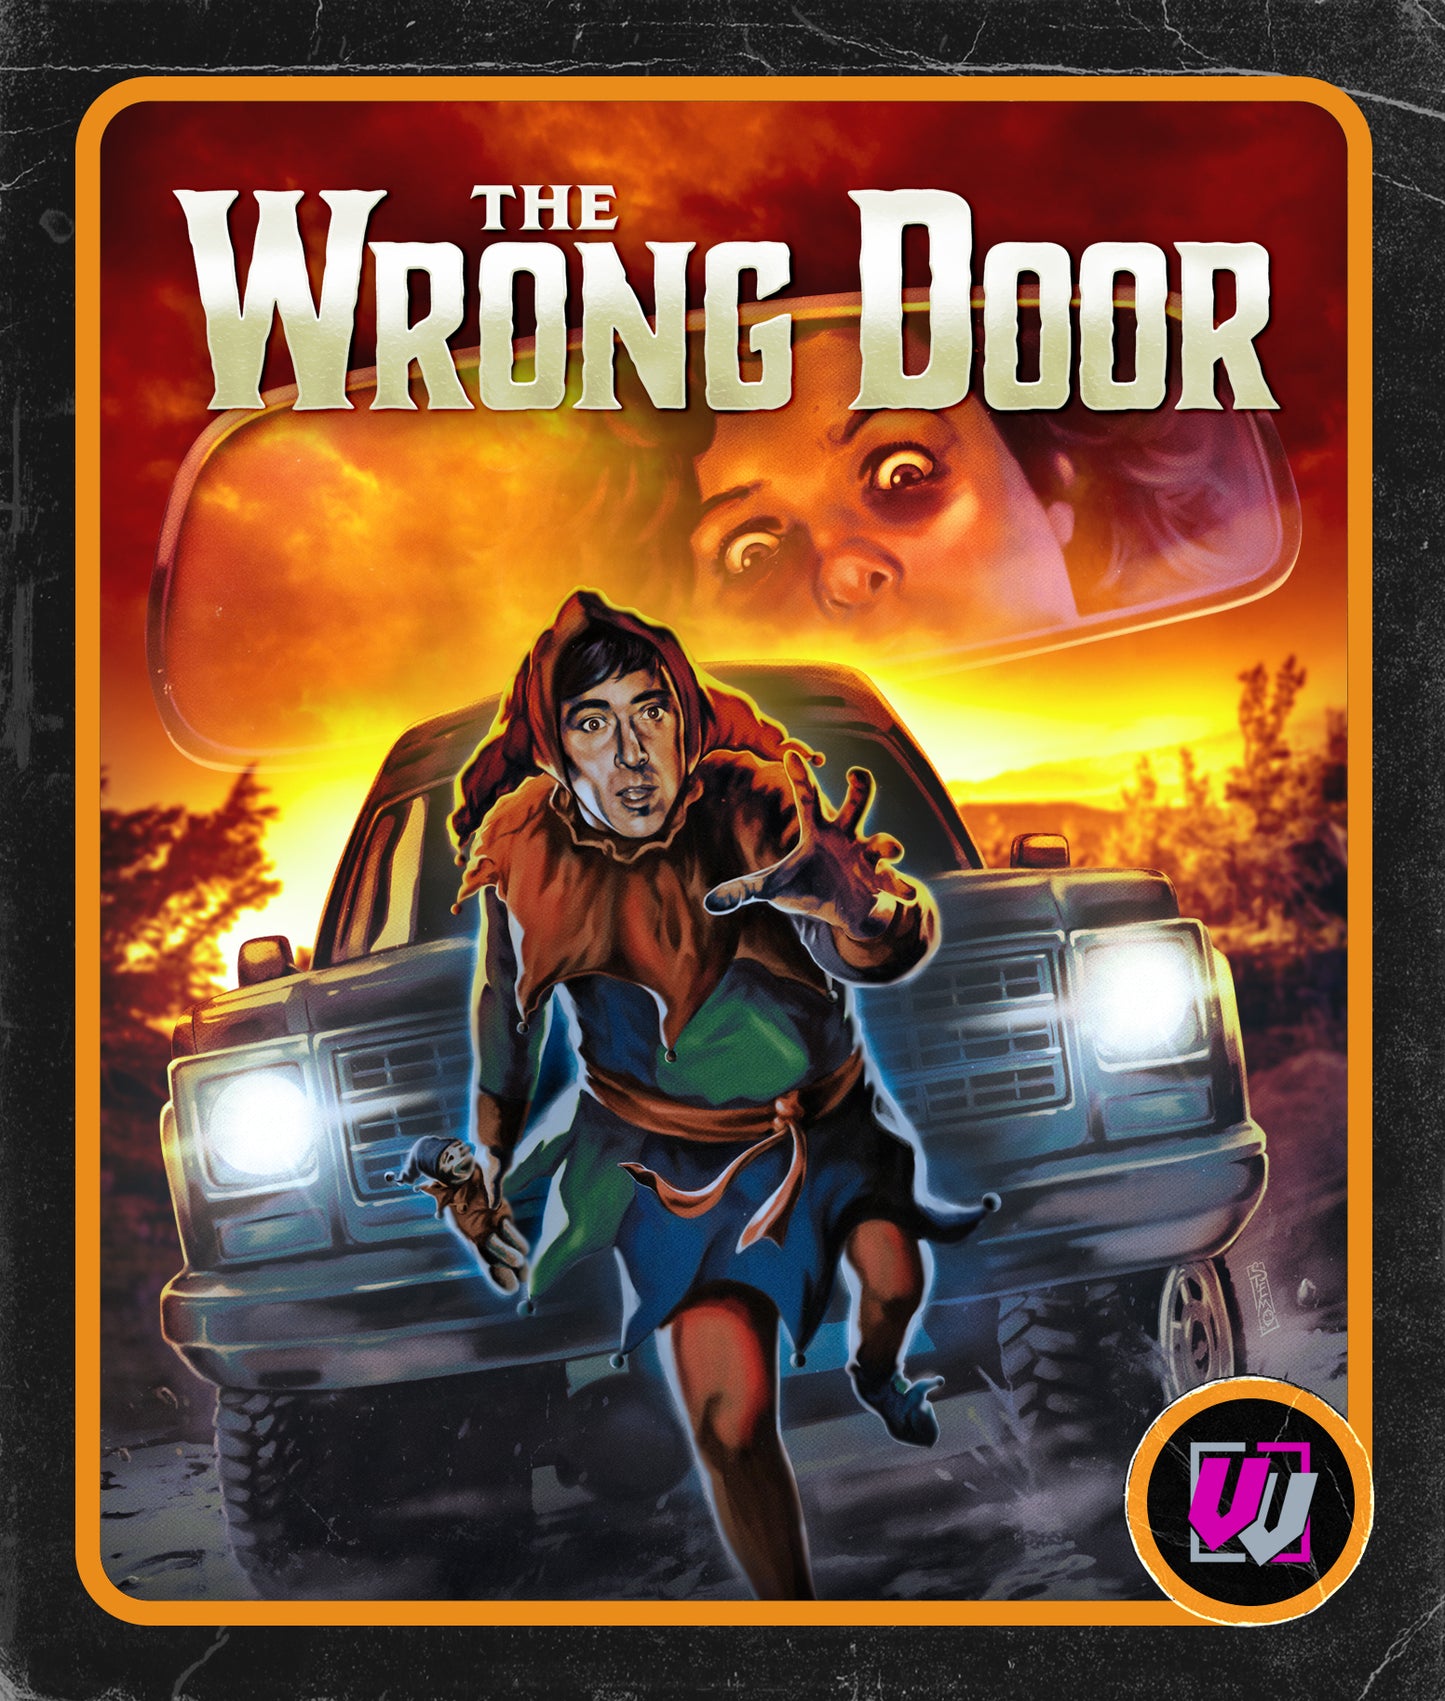 The Wrong Door Blu-ray Collector's Edition with Slipcover (Visual Vengeance)